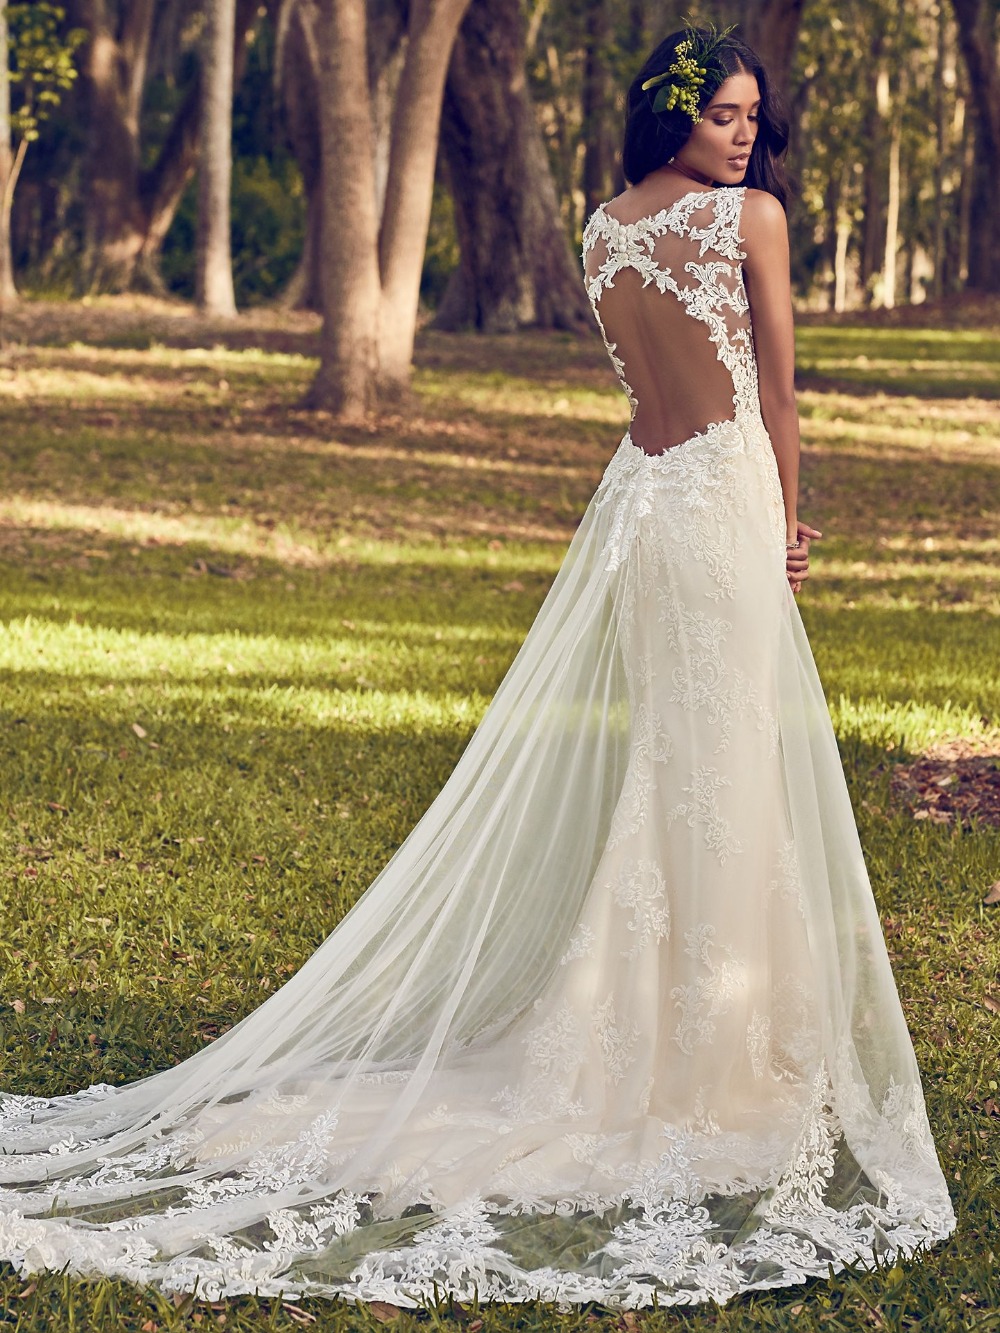 Maggie Sottero Designs Princess Gowns